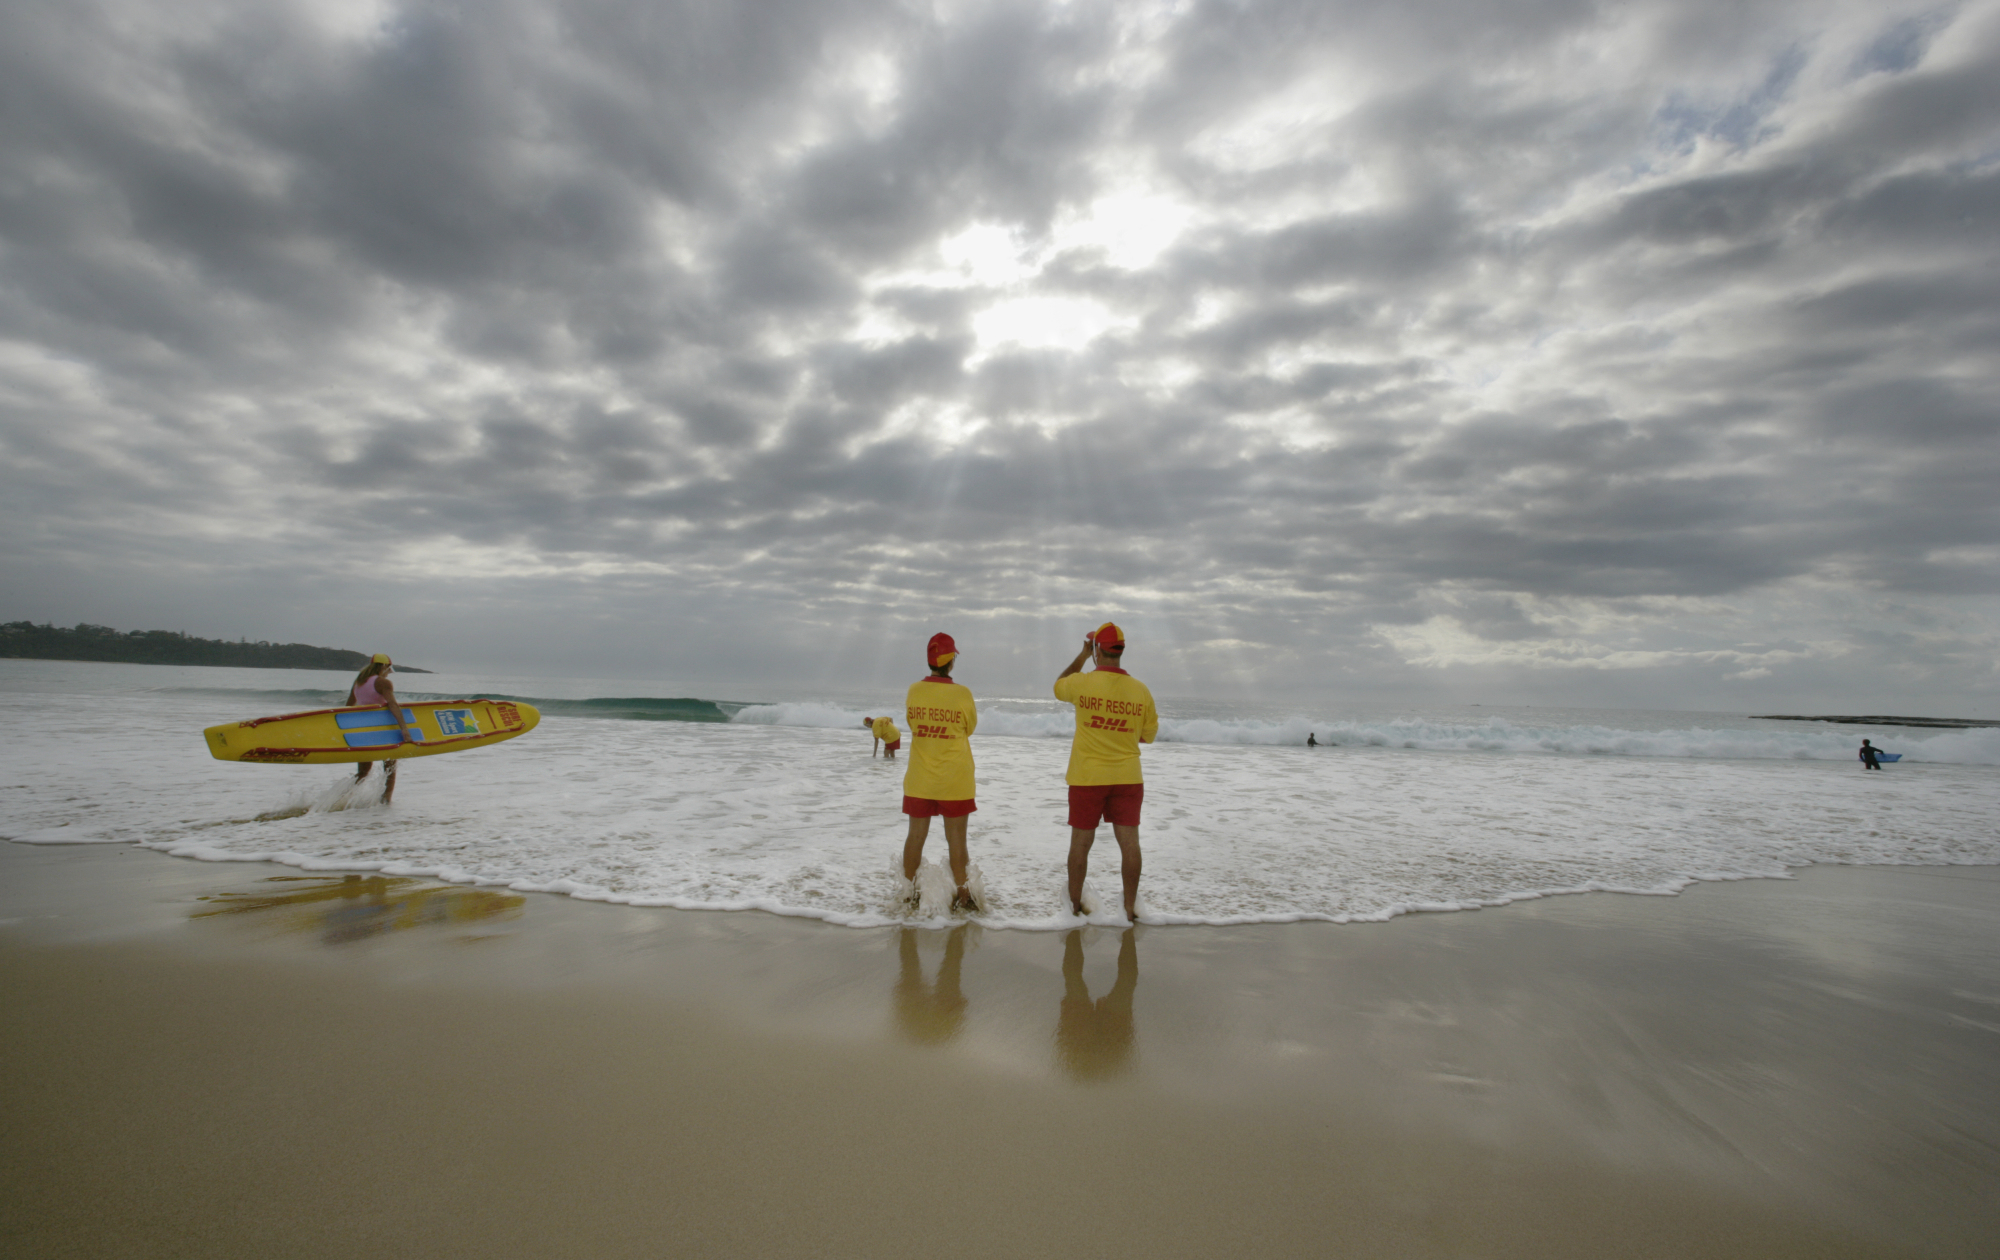  Two surf lifesavers stand looking out at the ocean at Mollymook, New South Wales. 